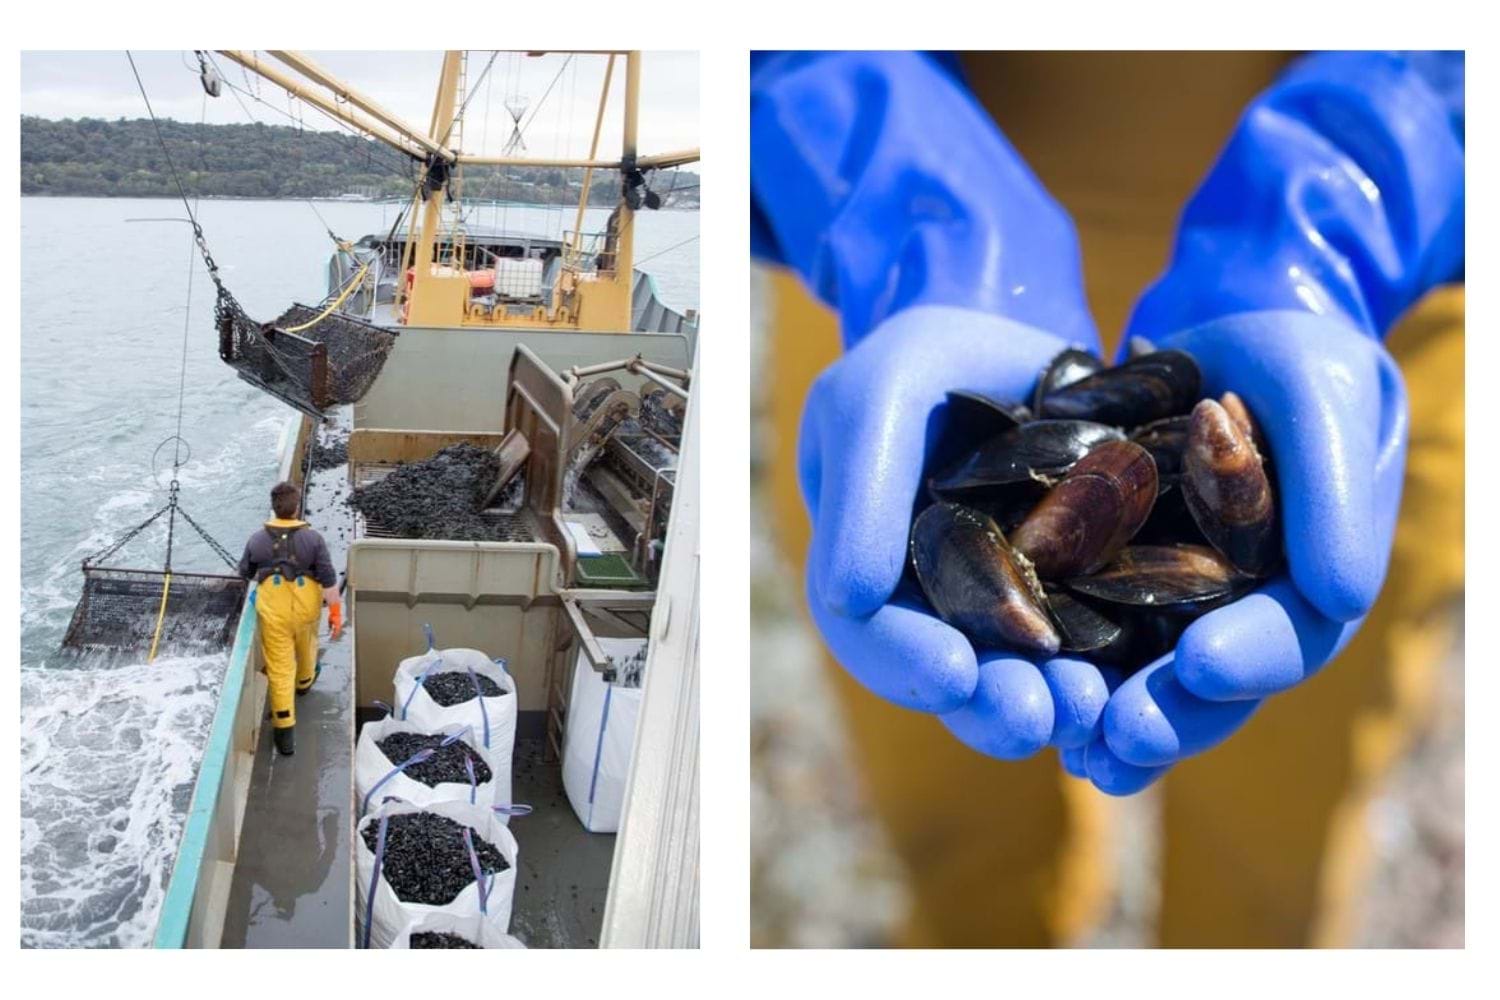 Fishermen working on vessel and a close up of mussels held in gloved hands